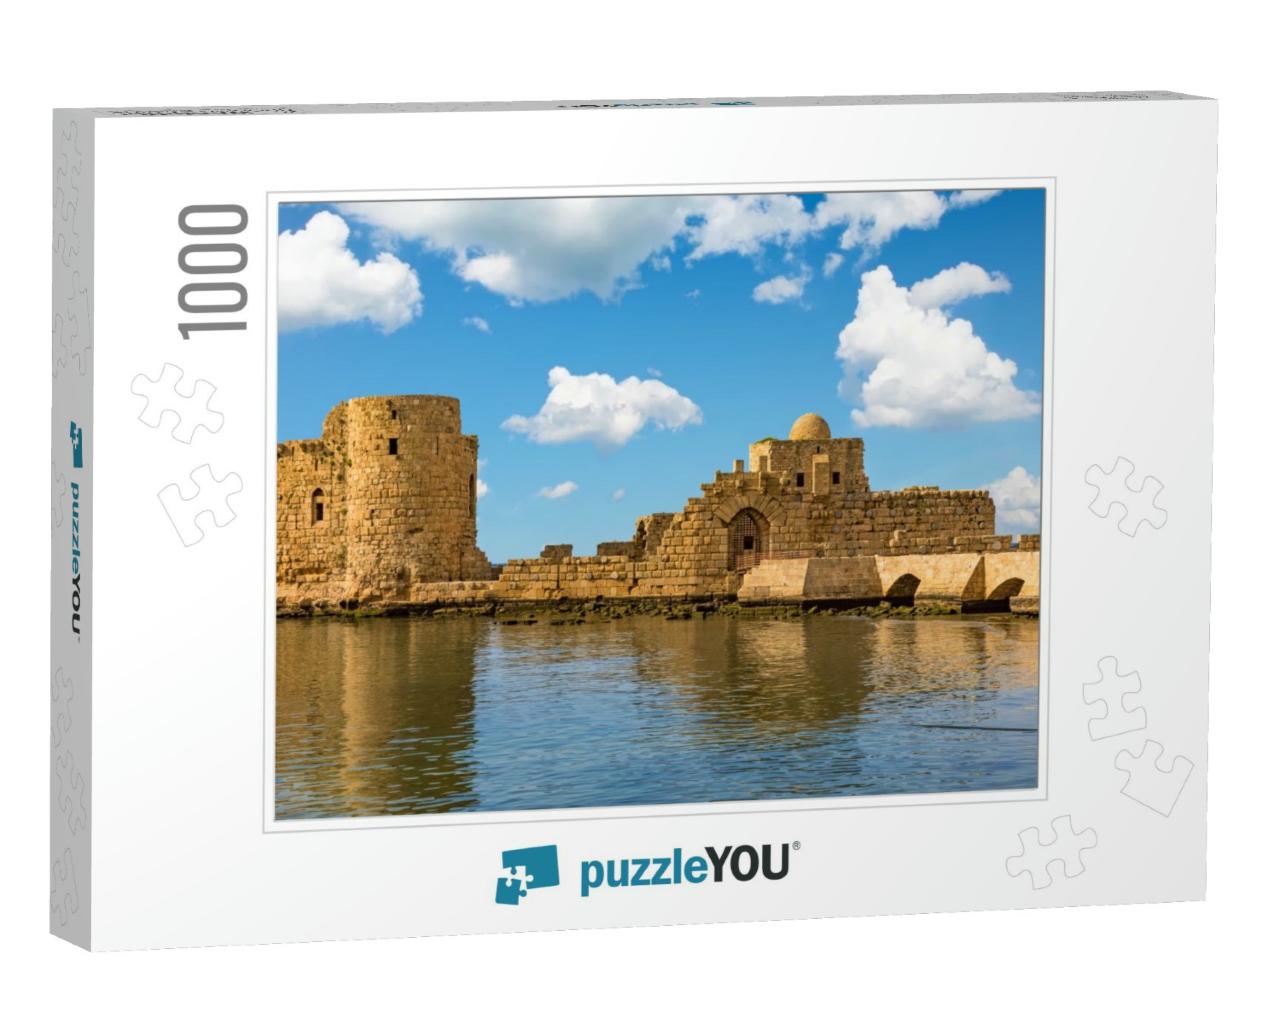 Crusaders Sea Castle Sidon Saida in South Lebanon Middle... Jigsaw Puzzle with 1000 pieces